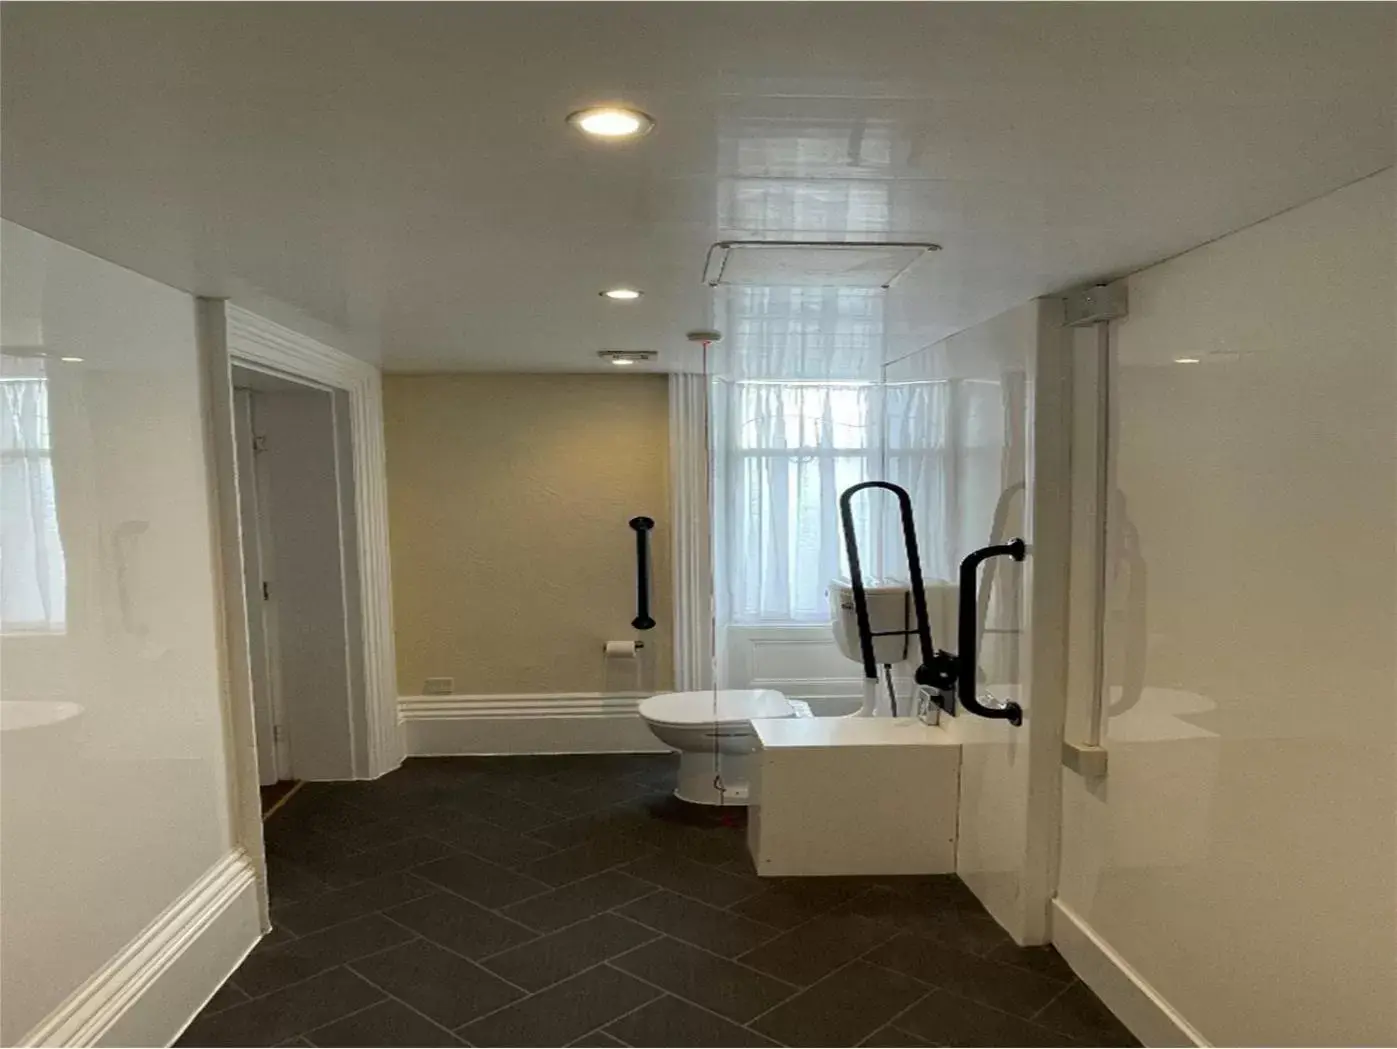 Facility for disabled guests, Bathroom in The Grand Scarborough